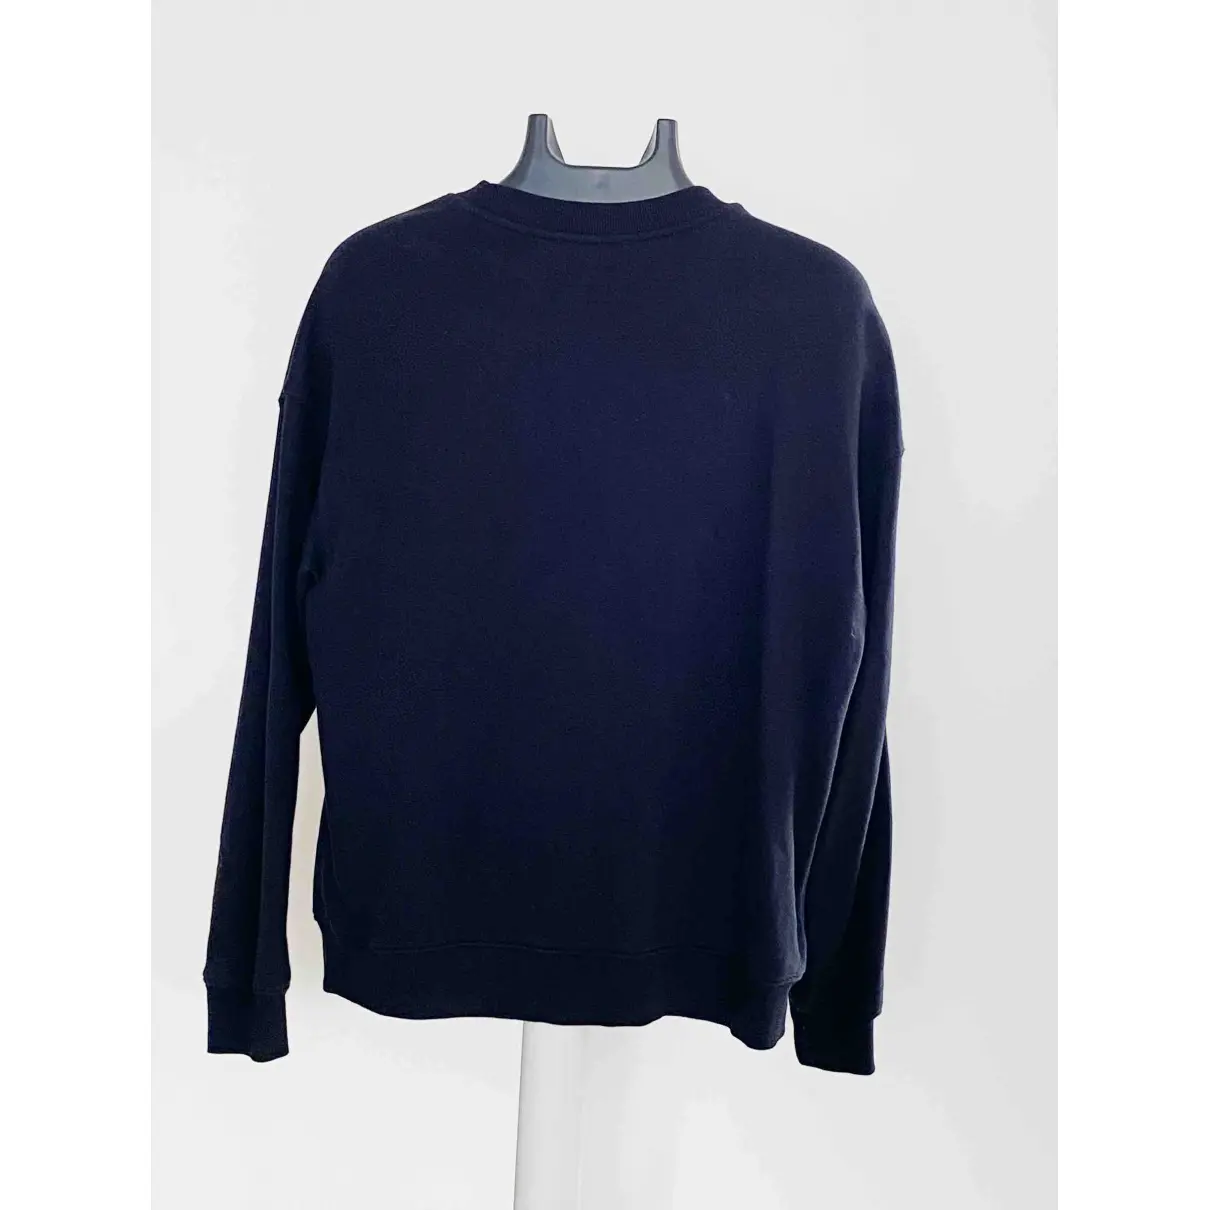 Buy Moschino for H&M Black Cotton Knitwear online